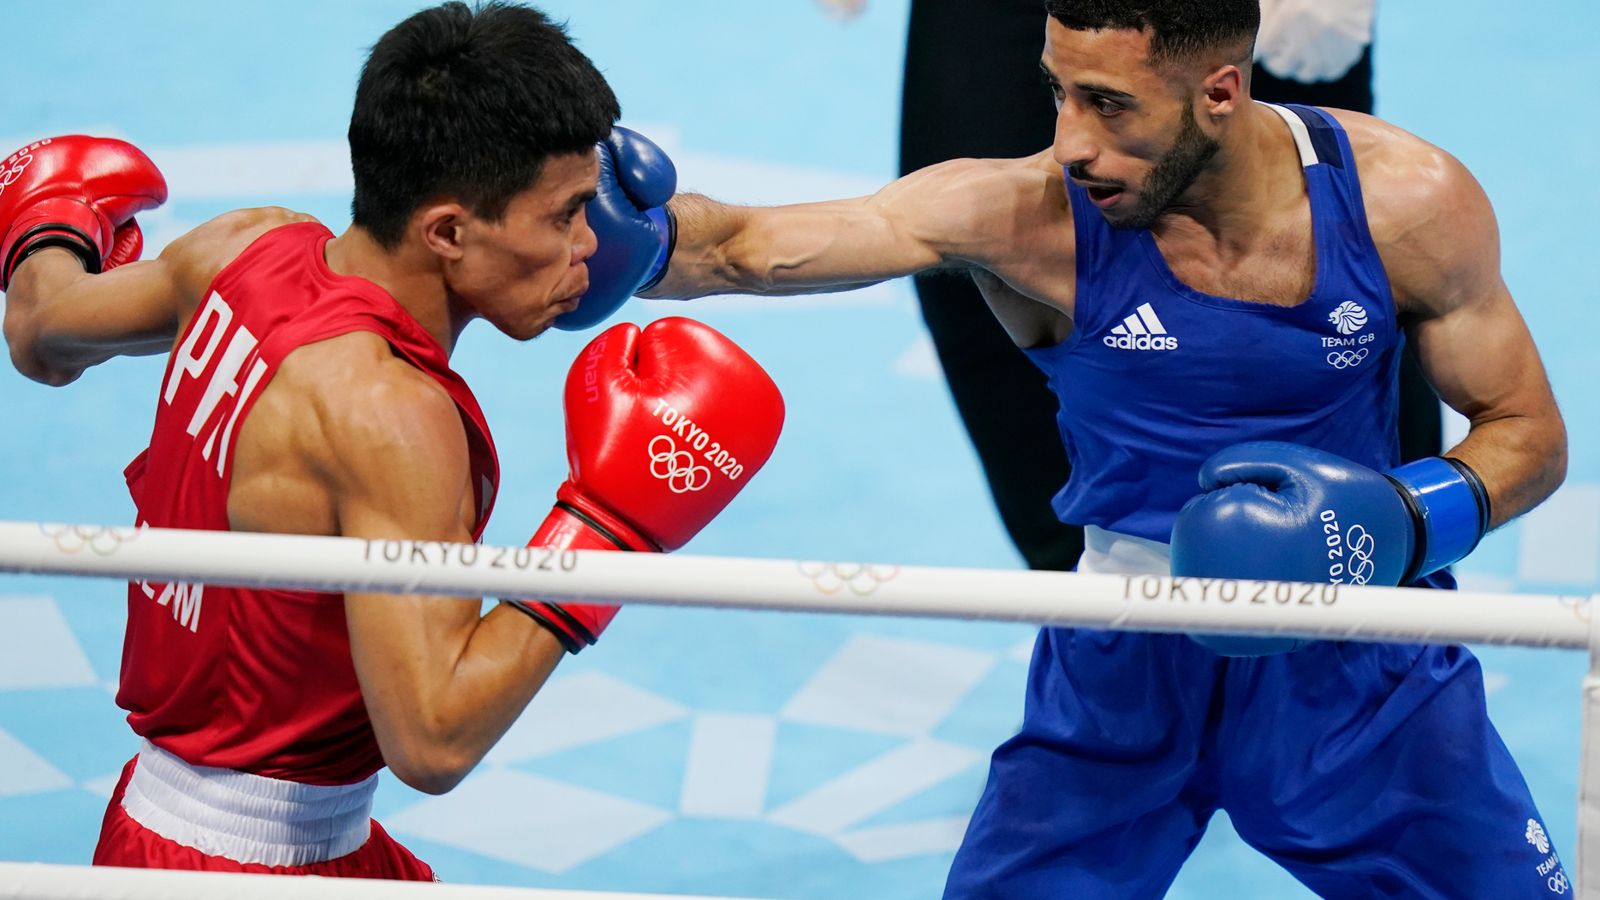 IOC raises prospect of boxing being excluded from 2024 Olympics in